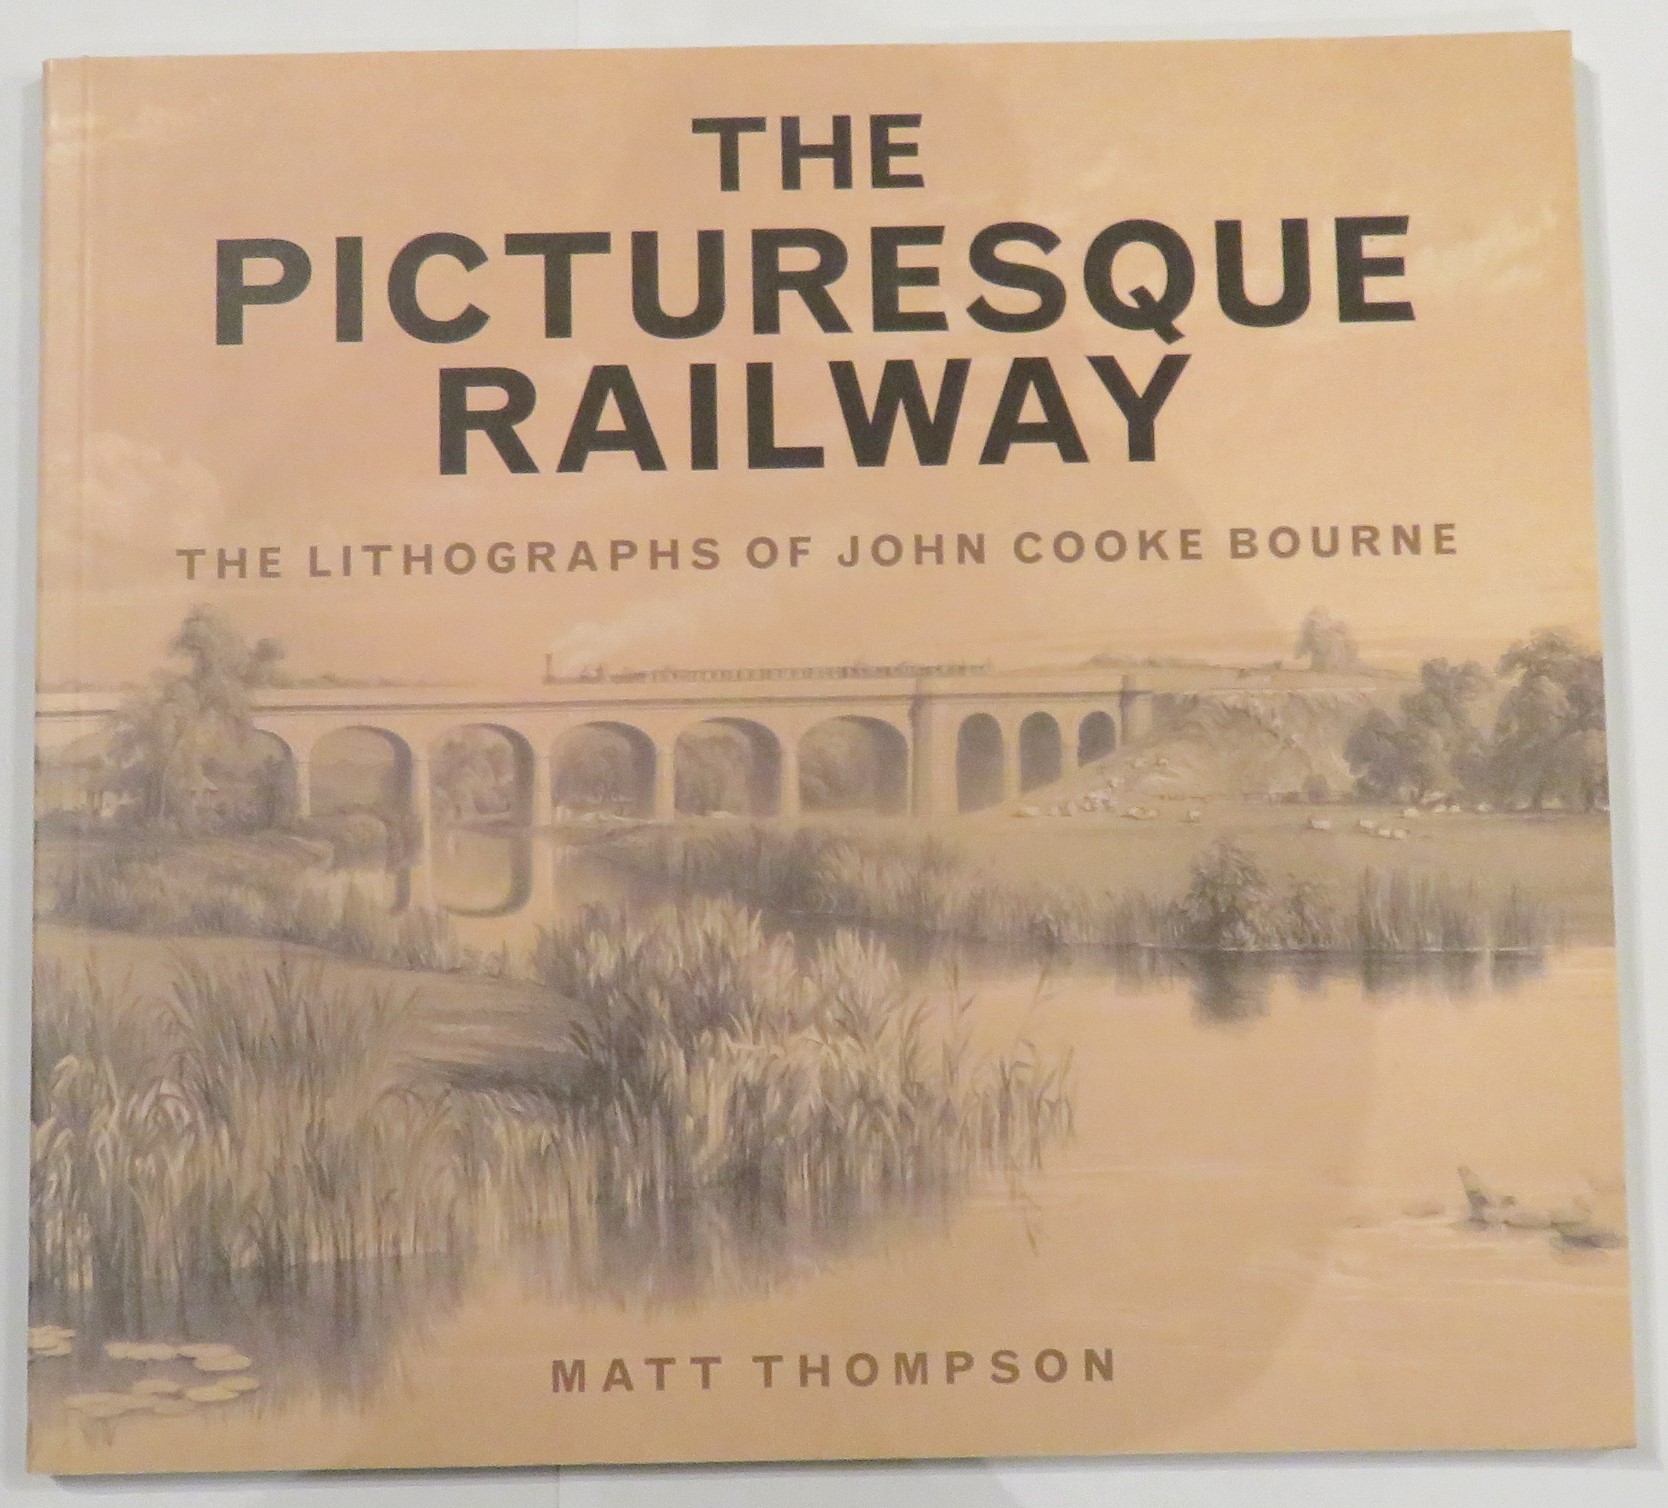 The Picturesque Railway: The Lithographs of John Cooke Bourne